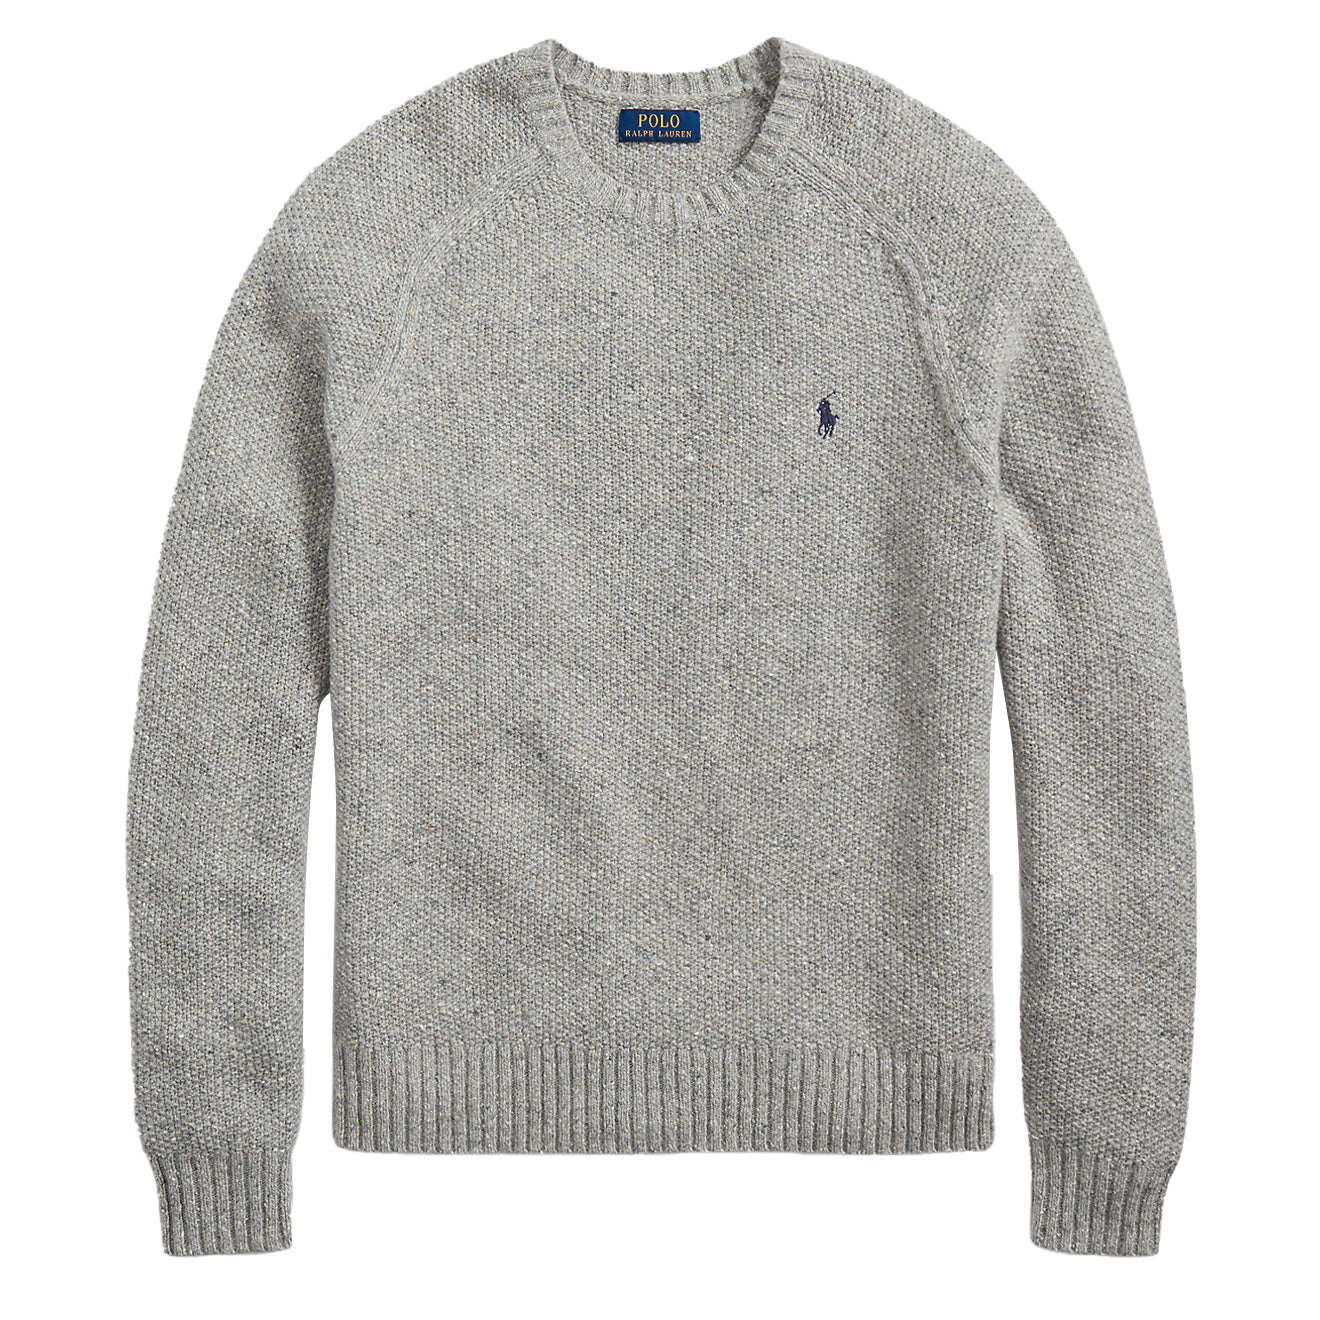 Polo Ralph Lauren Saddle Pullover Grey Donegal | The Sporting Lodge